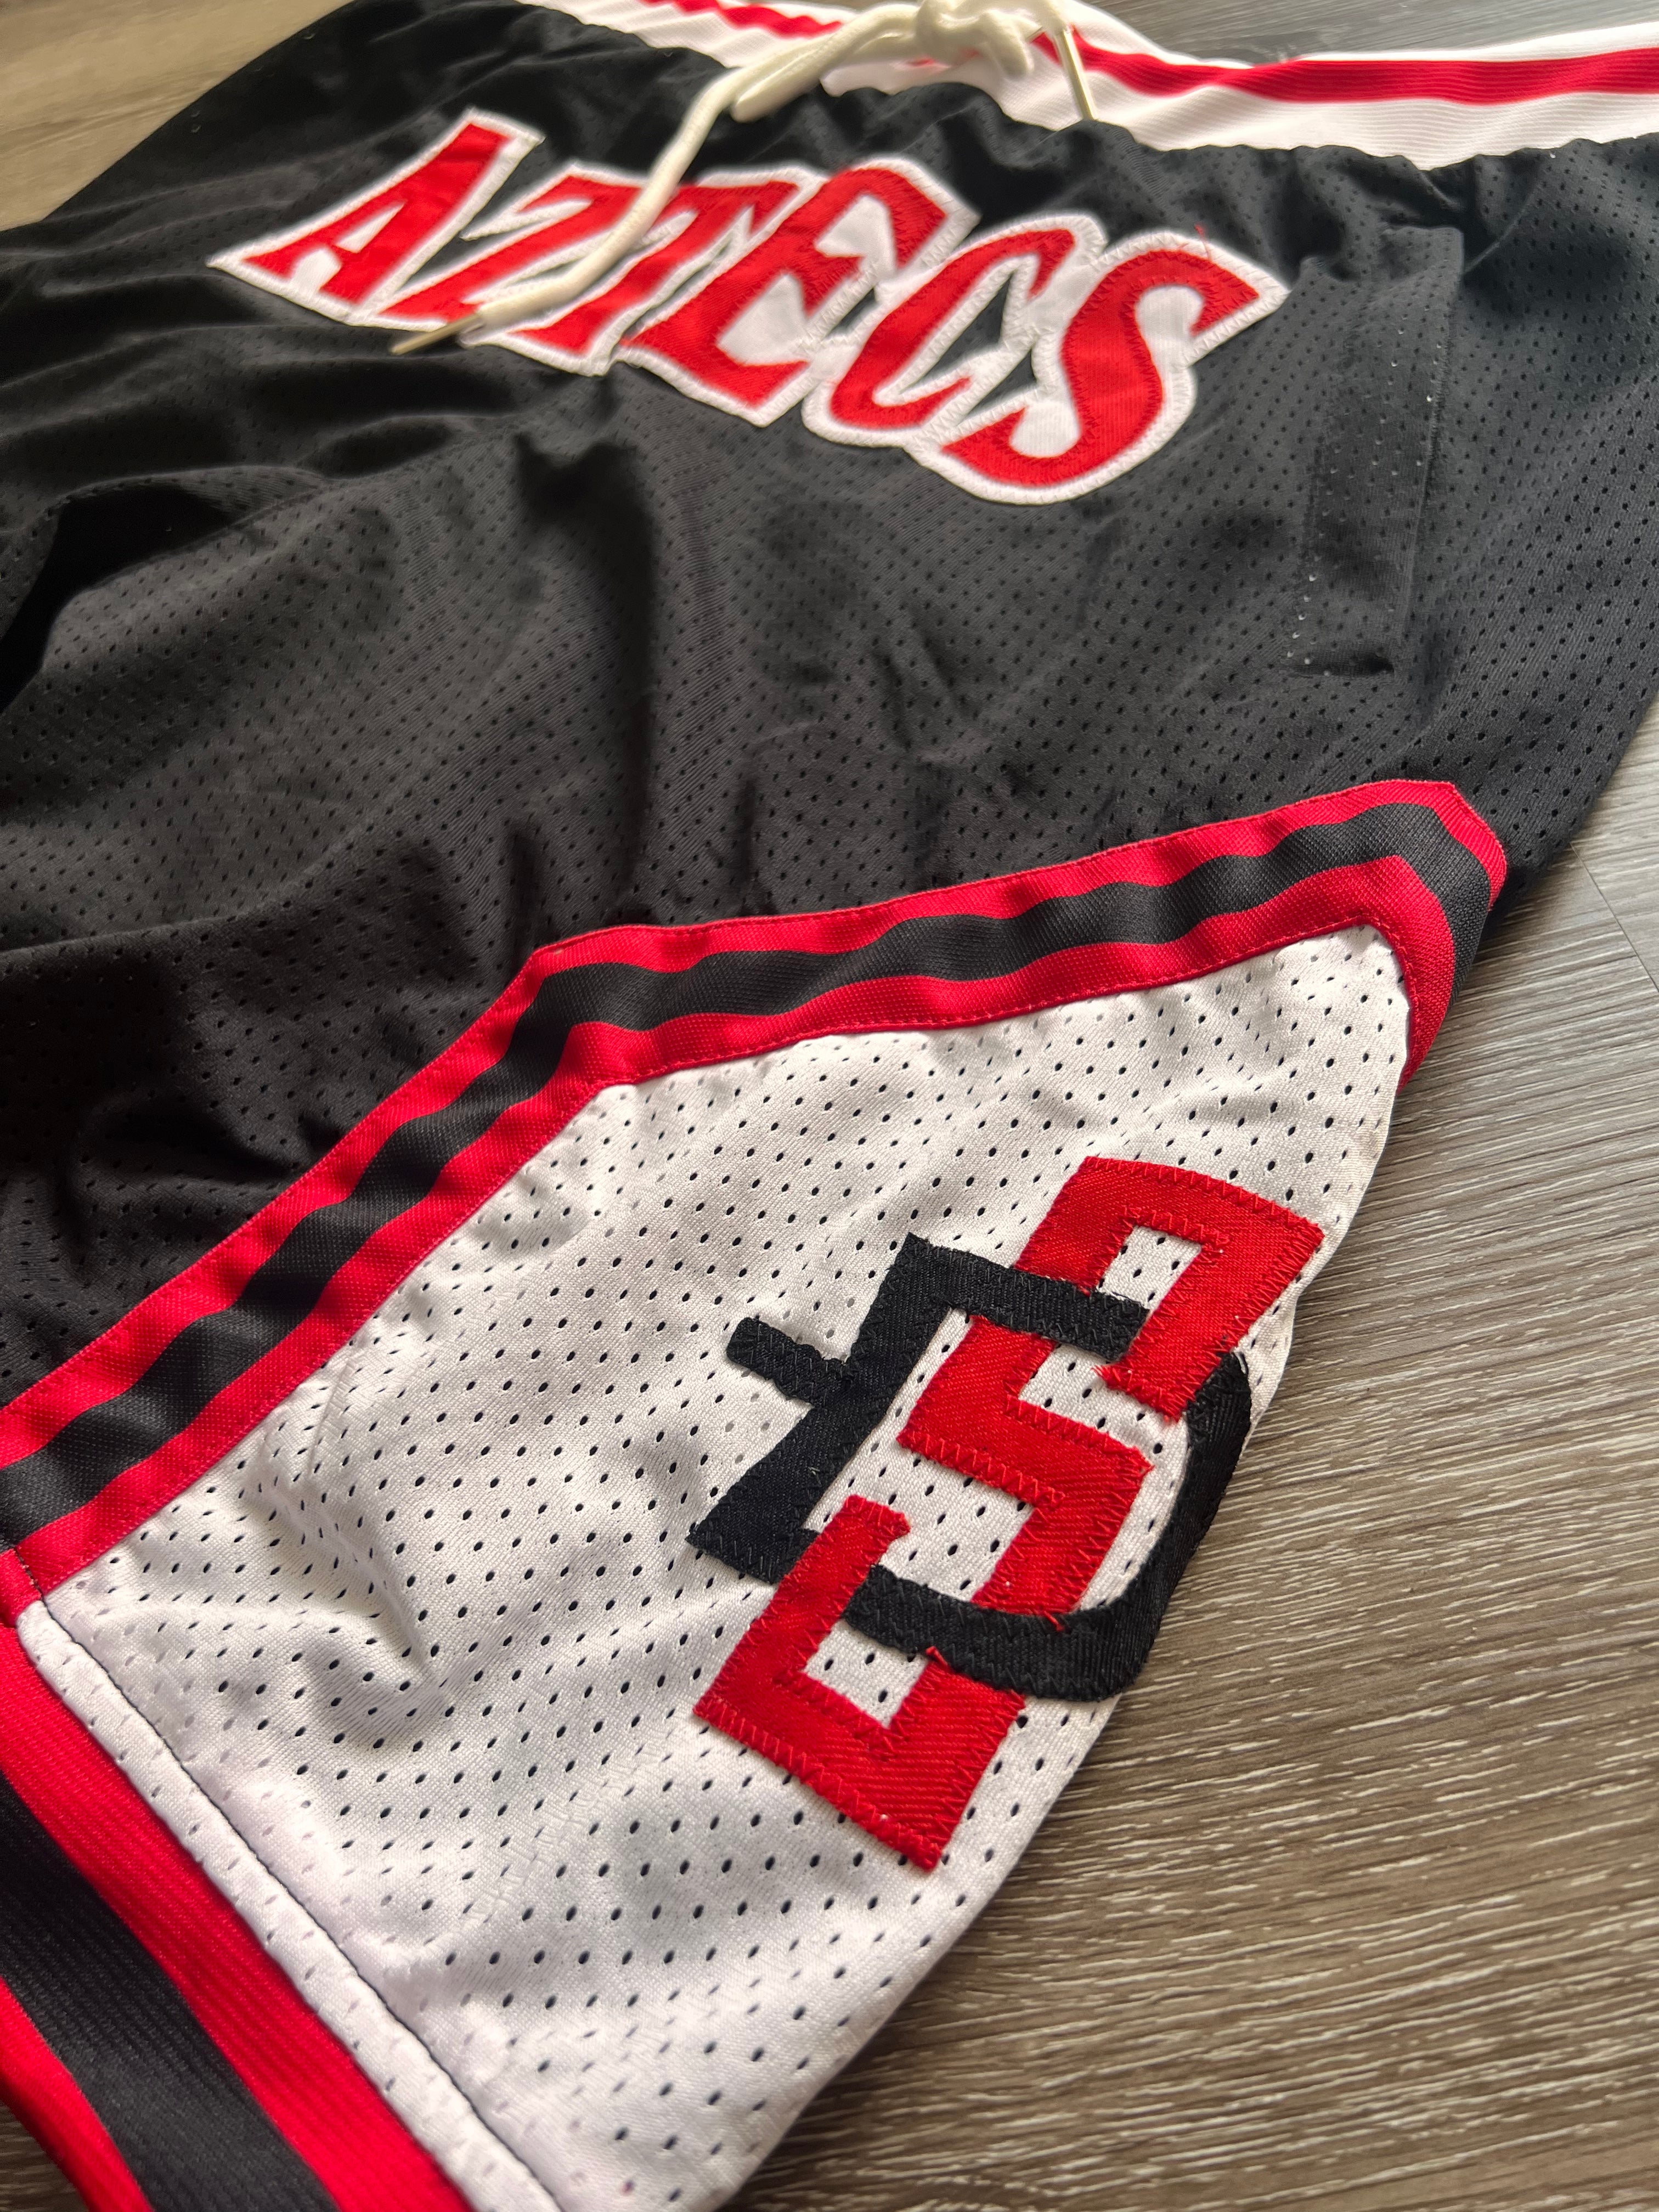 San Diego State Embroidered Basketball Shorts